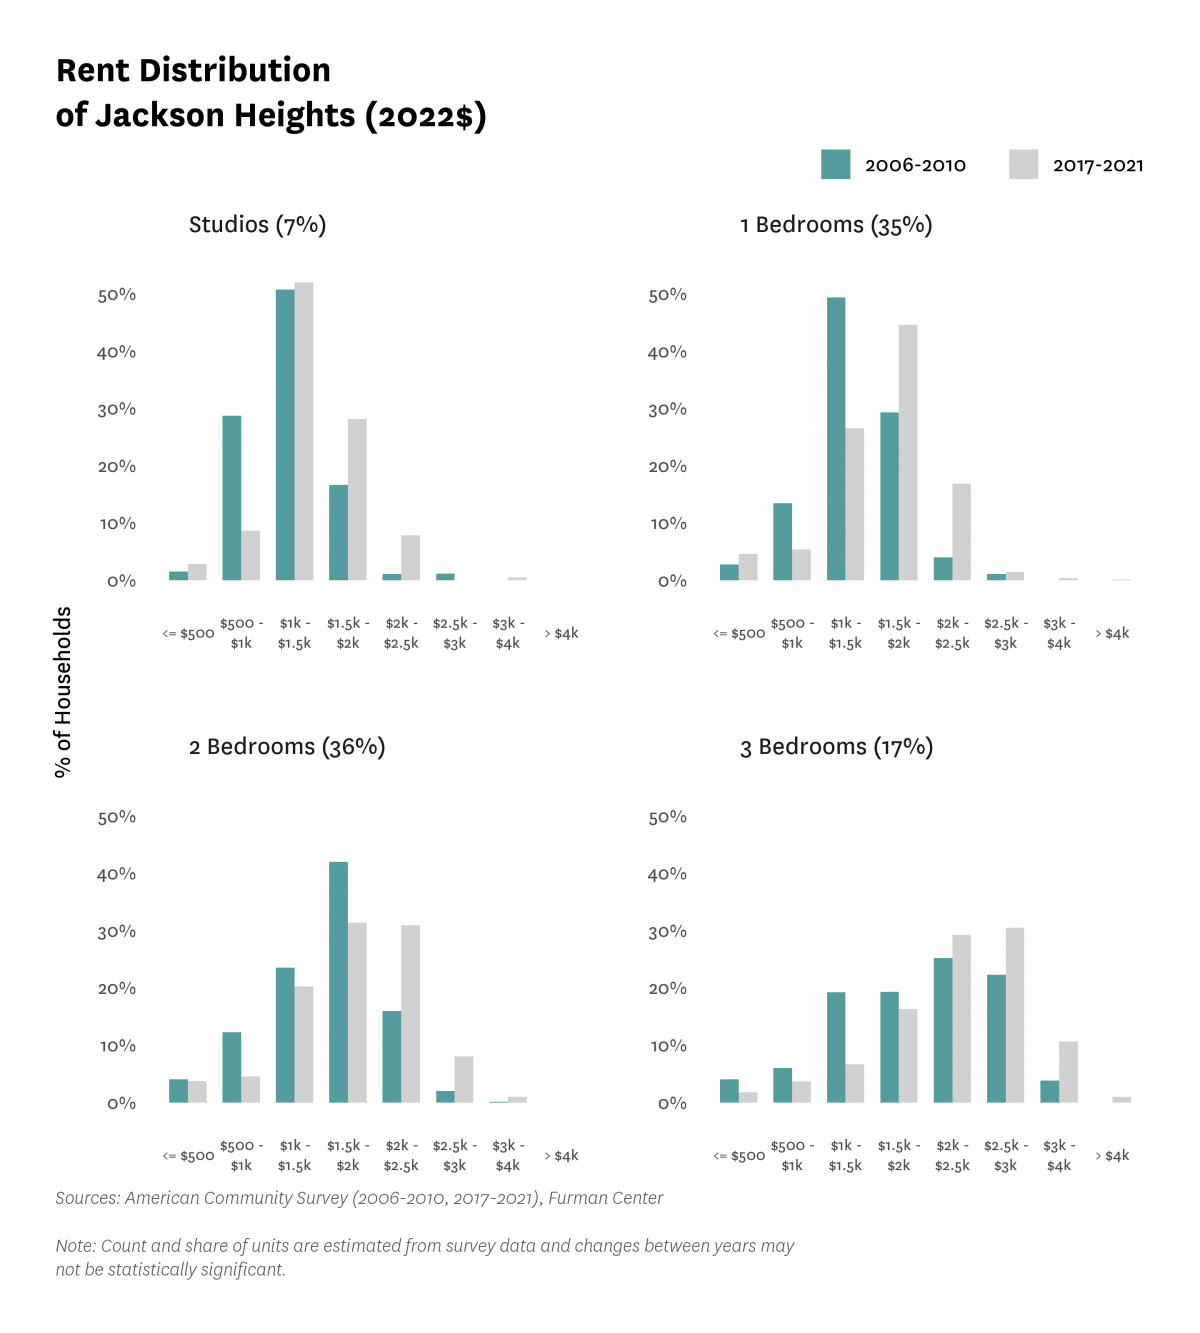 Graph showing the distribution of rents in Jackson Heights in both 2010 and 2017-2021.